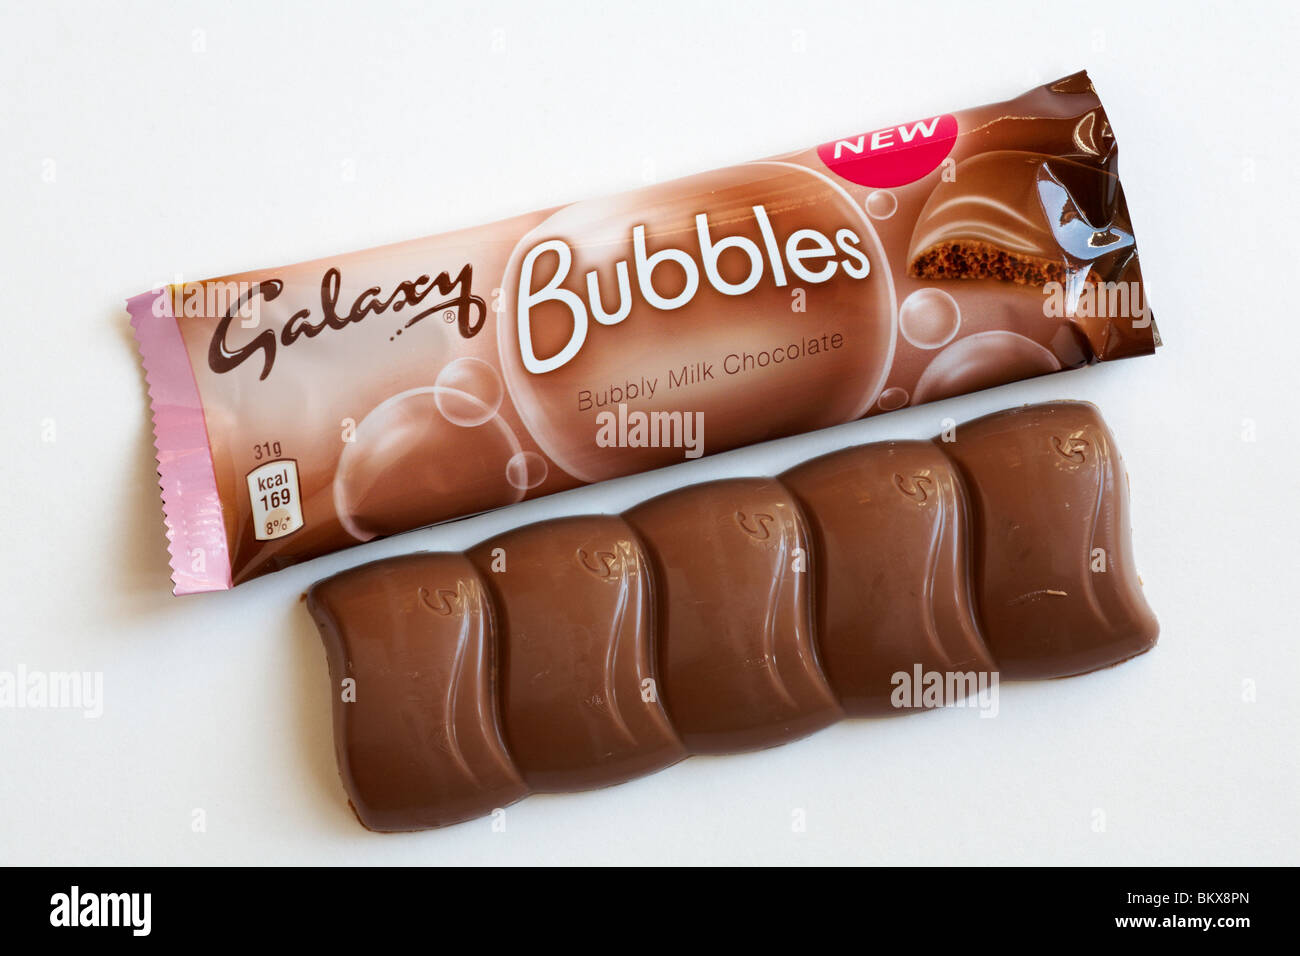 Galaxy Bubbles chocolate bar removed from wrapper isolated on white background Stock Photo